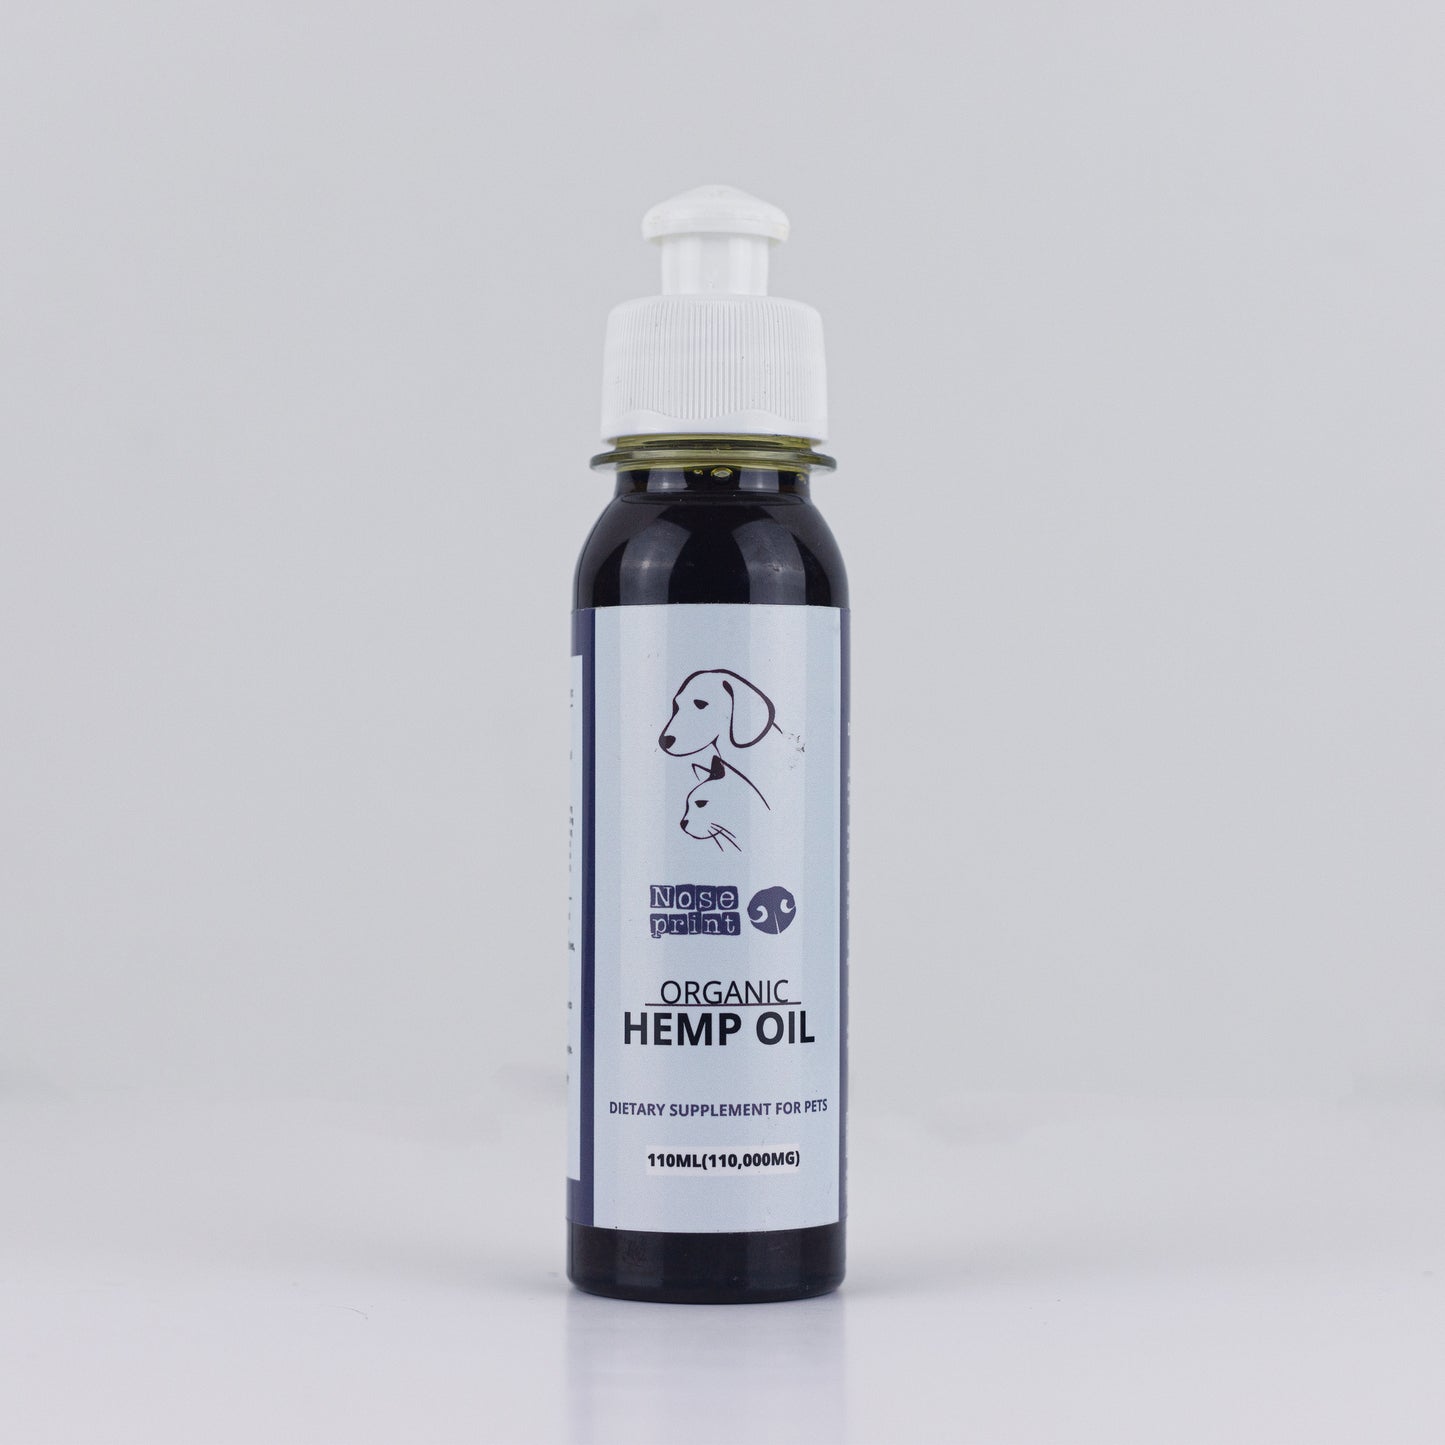 110 ML 100% Natural Hemp Oil Drops For Dogs and Cats